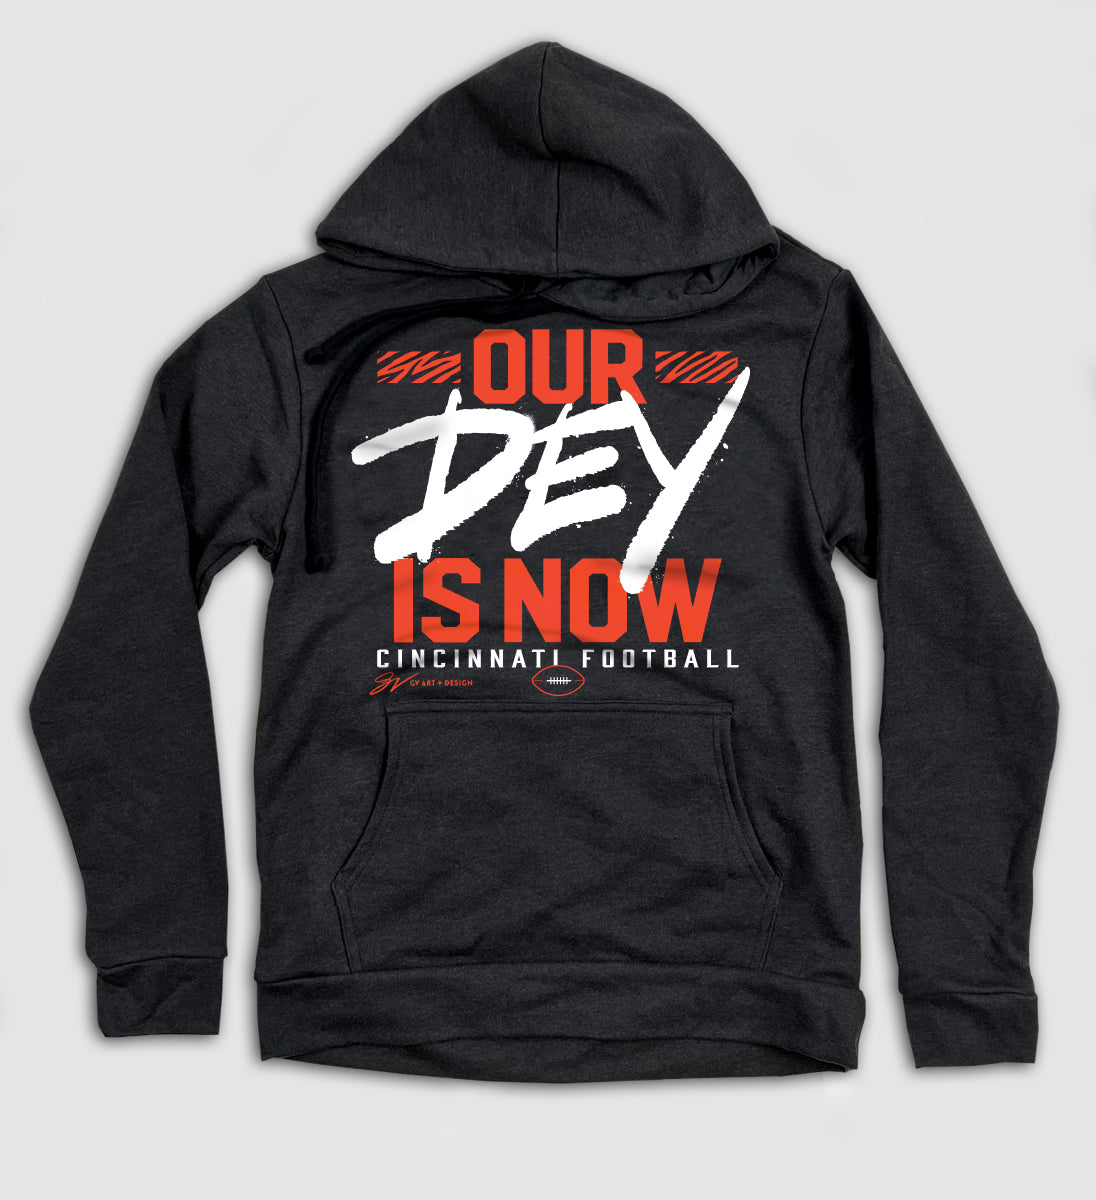 Our Dey Is Now Football Hooded Sweatshirt